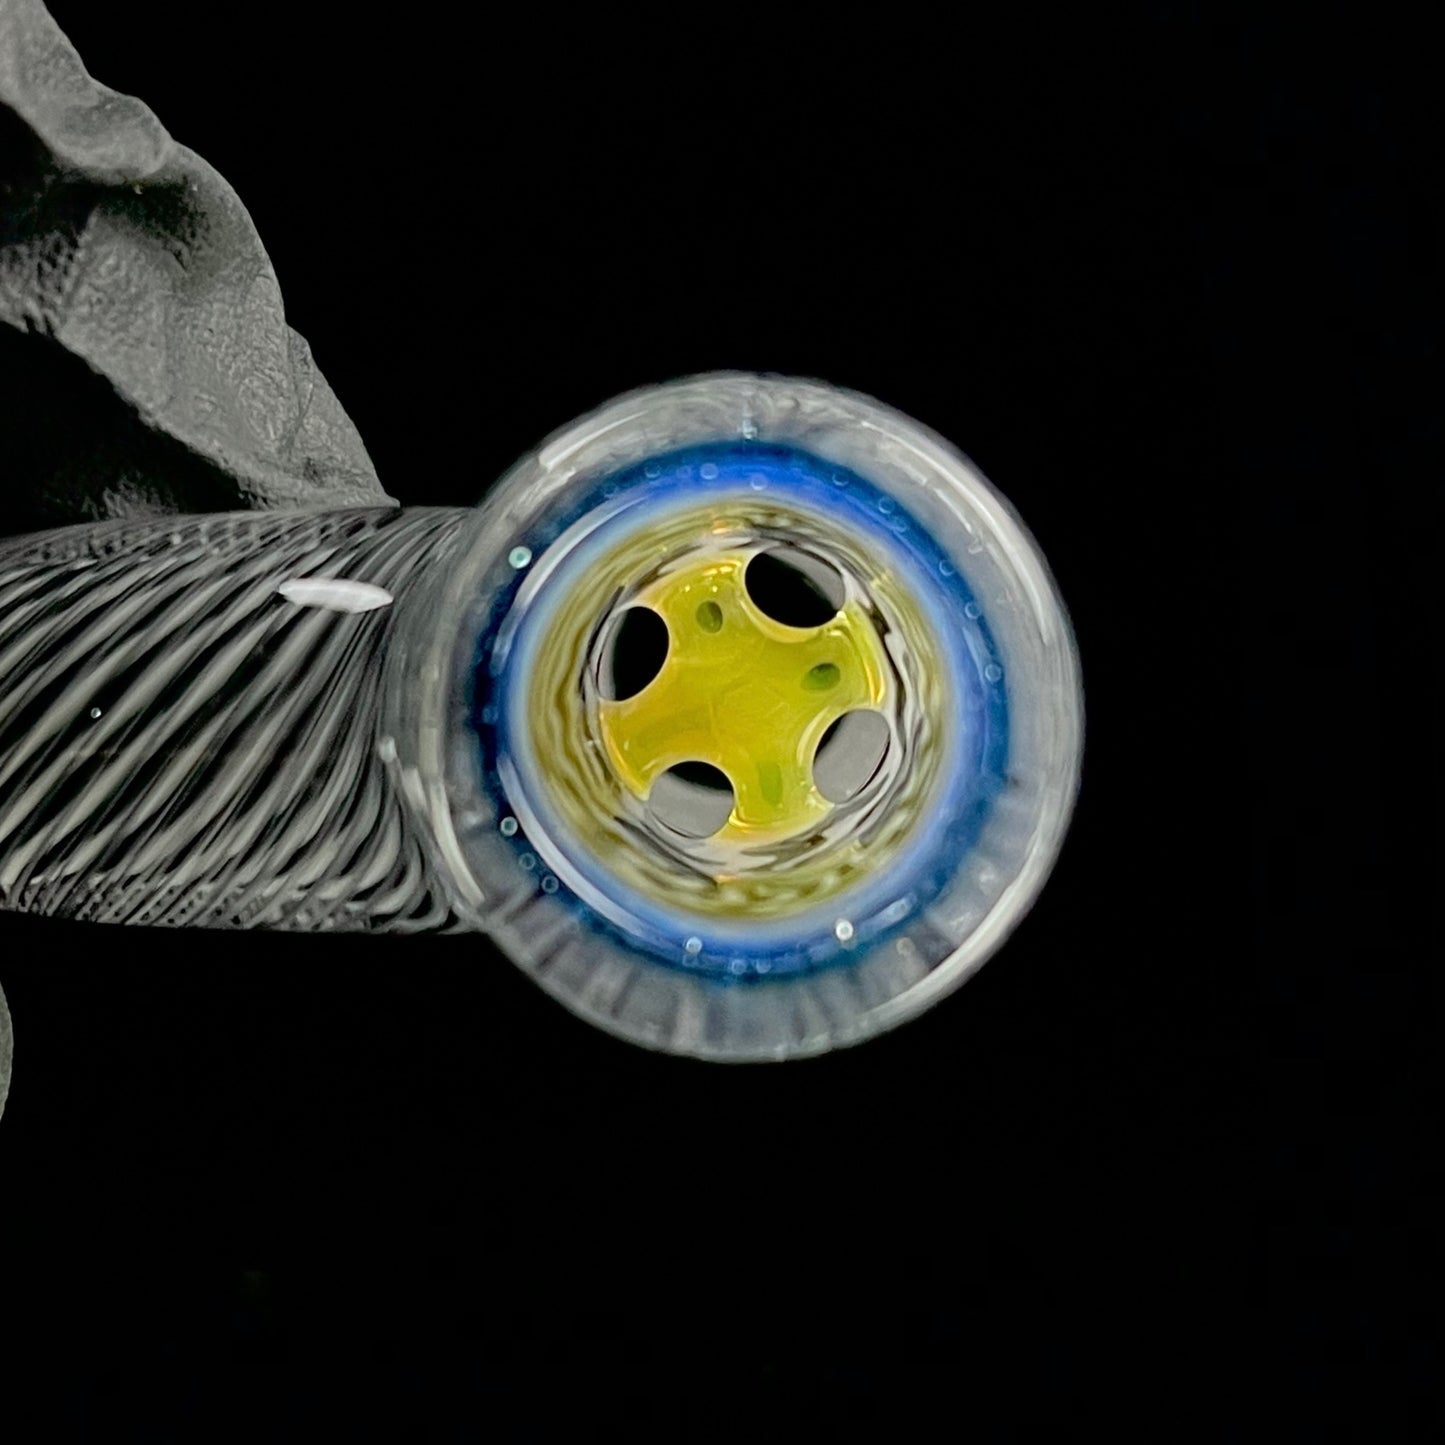 18mm Black & White Hypnotech slide by Jared Wetmore